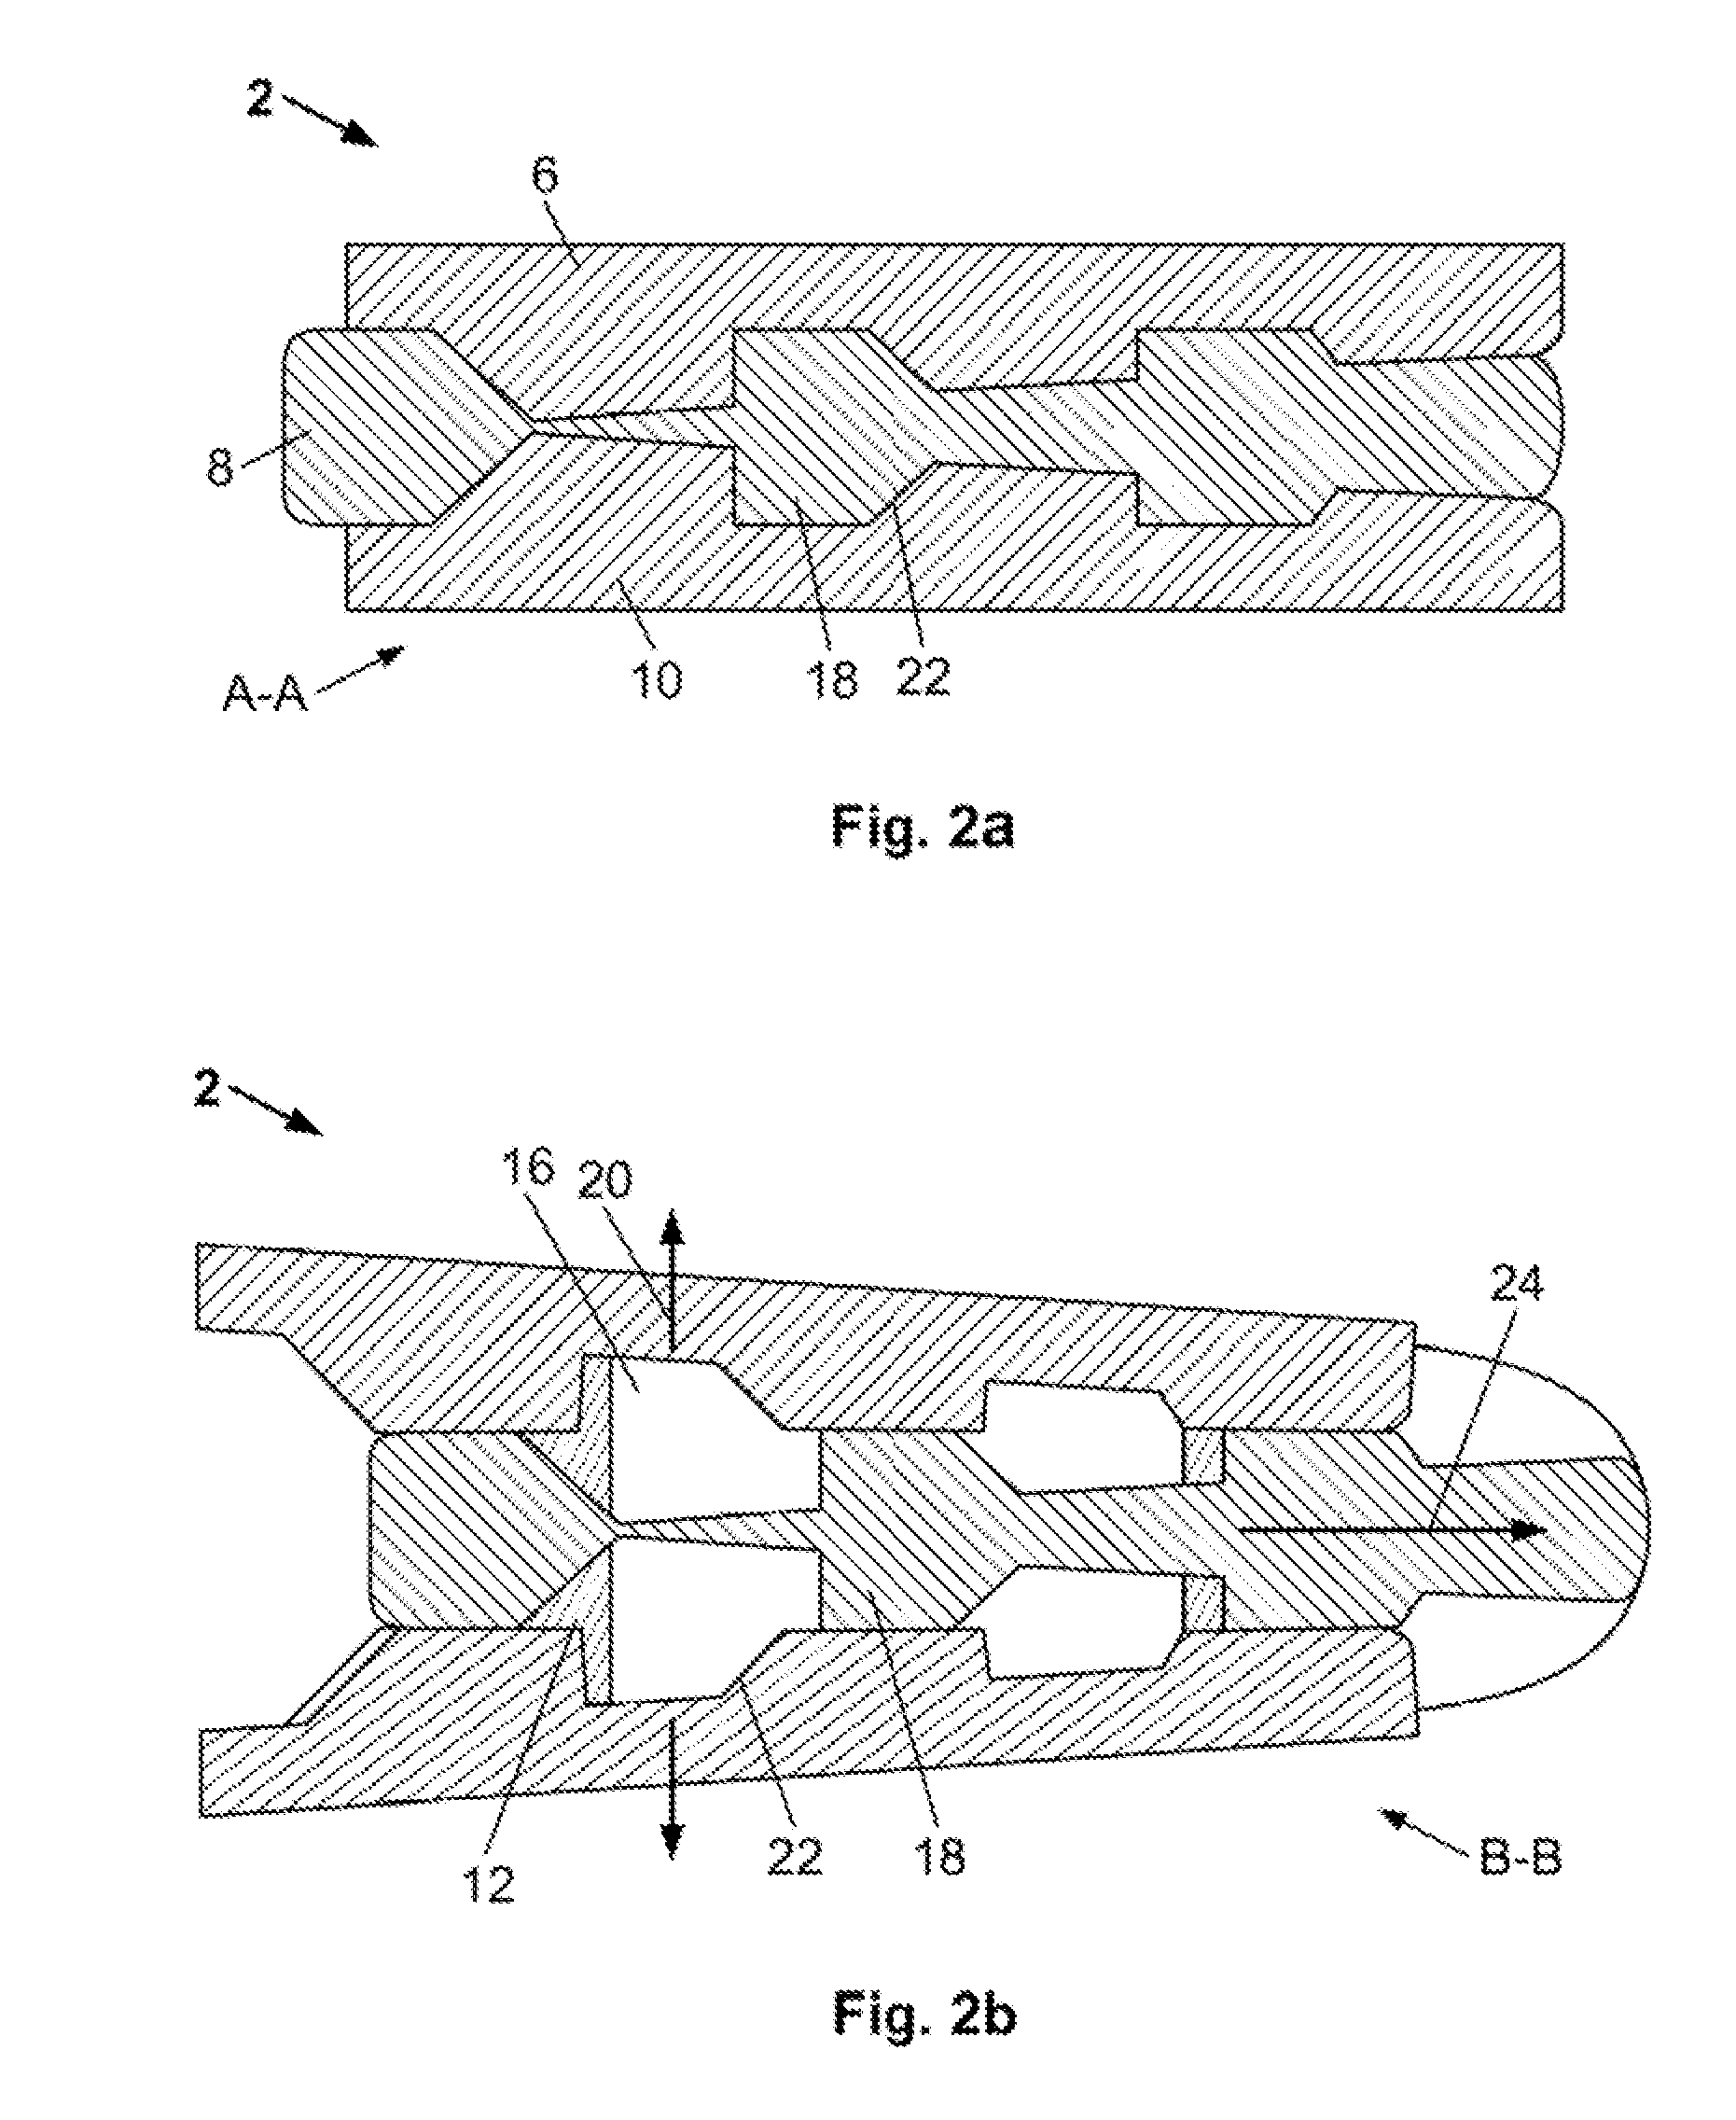 Fixation device and method